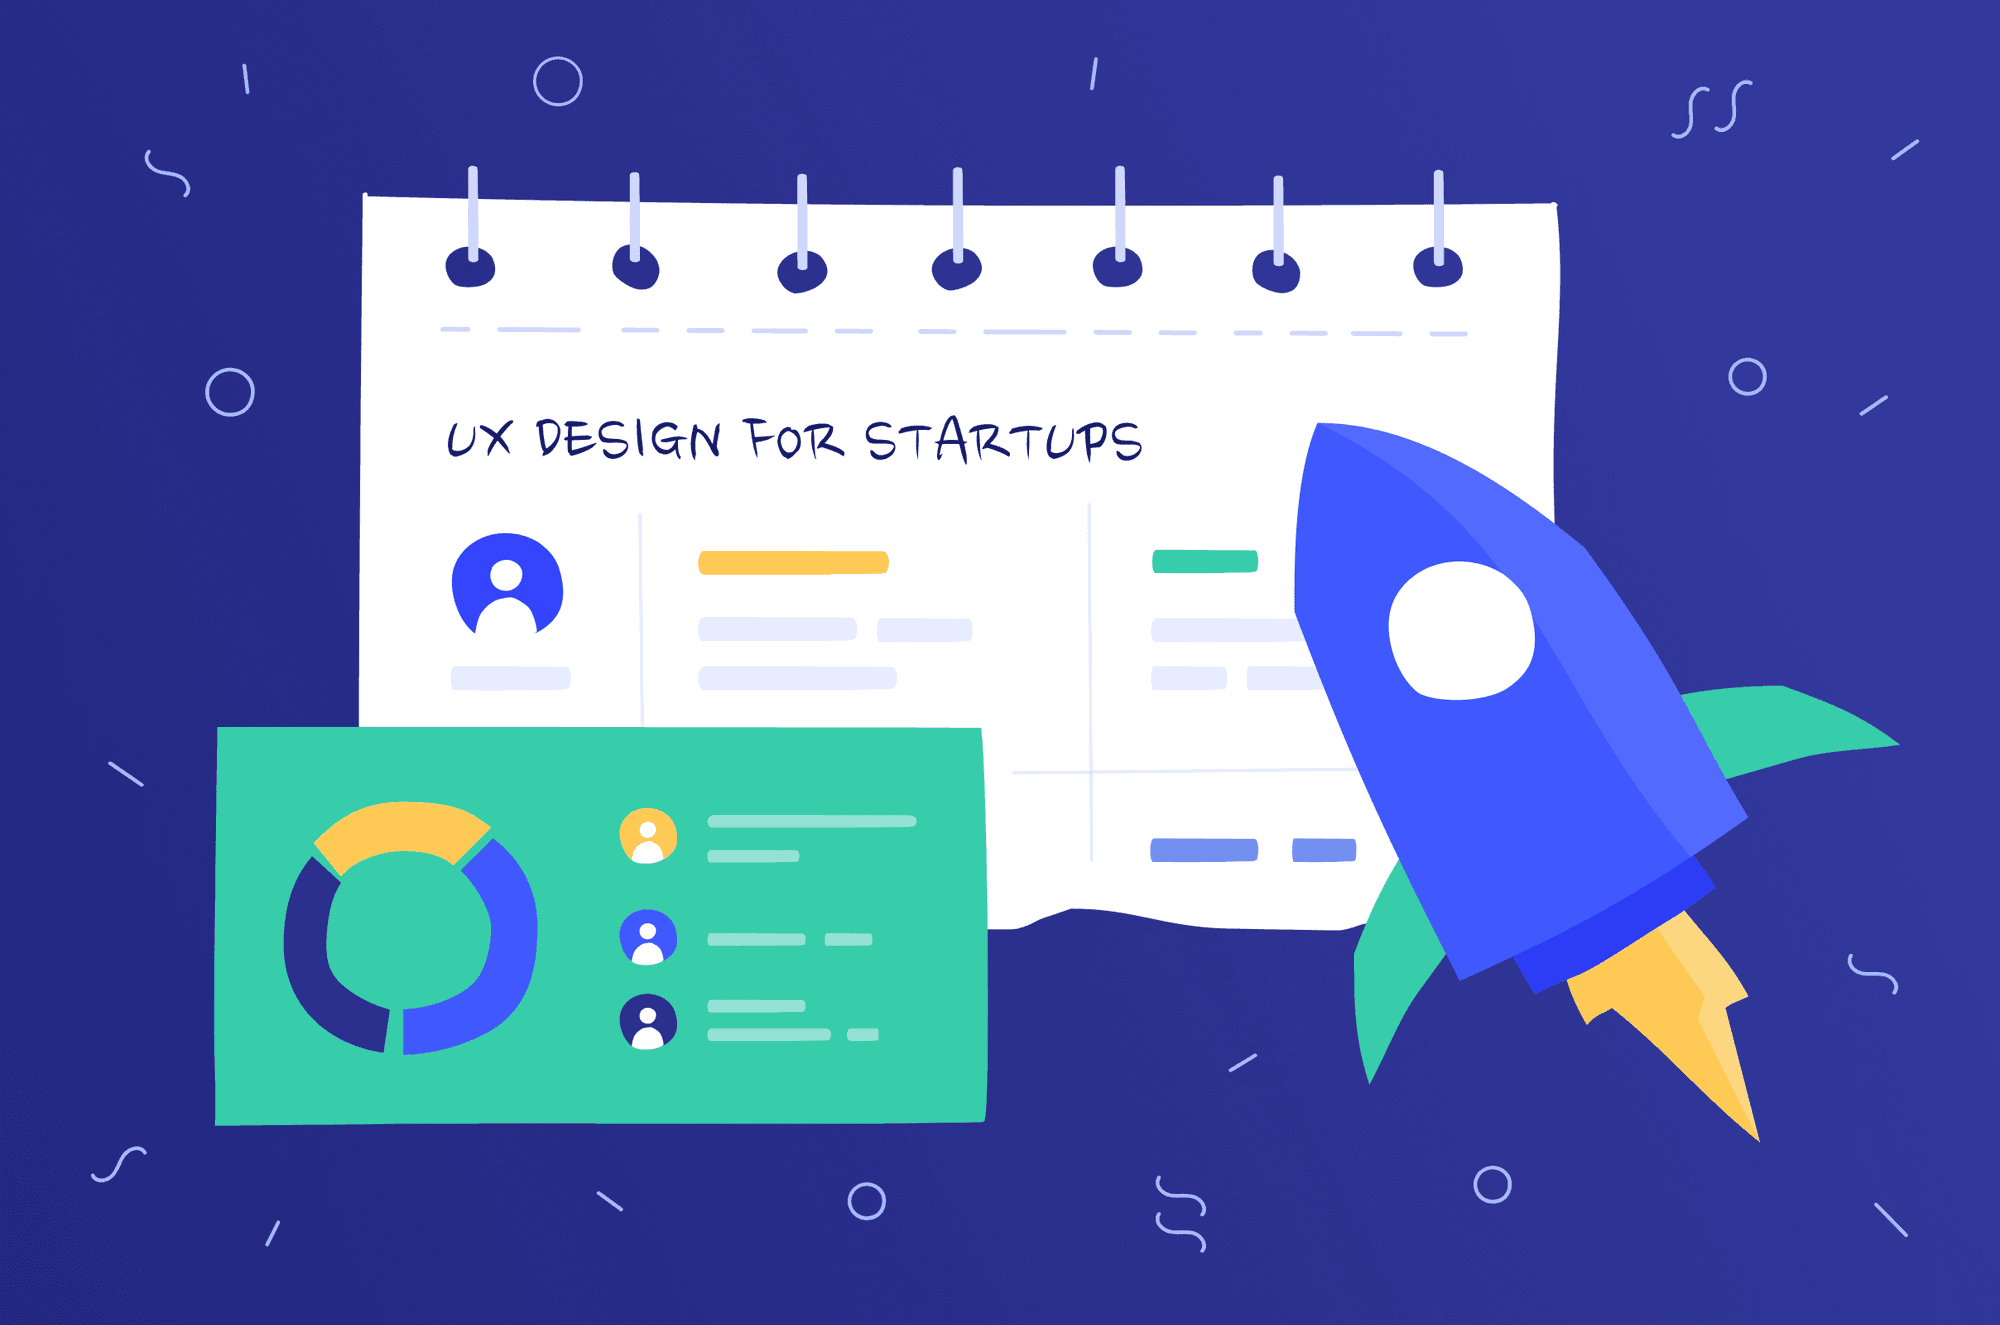 UX design for startups: does every startup need a UX designer?